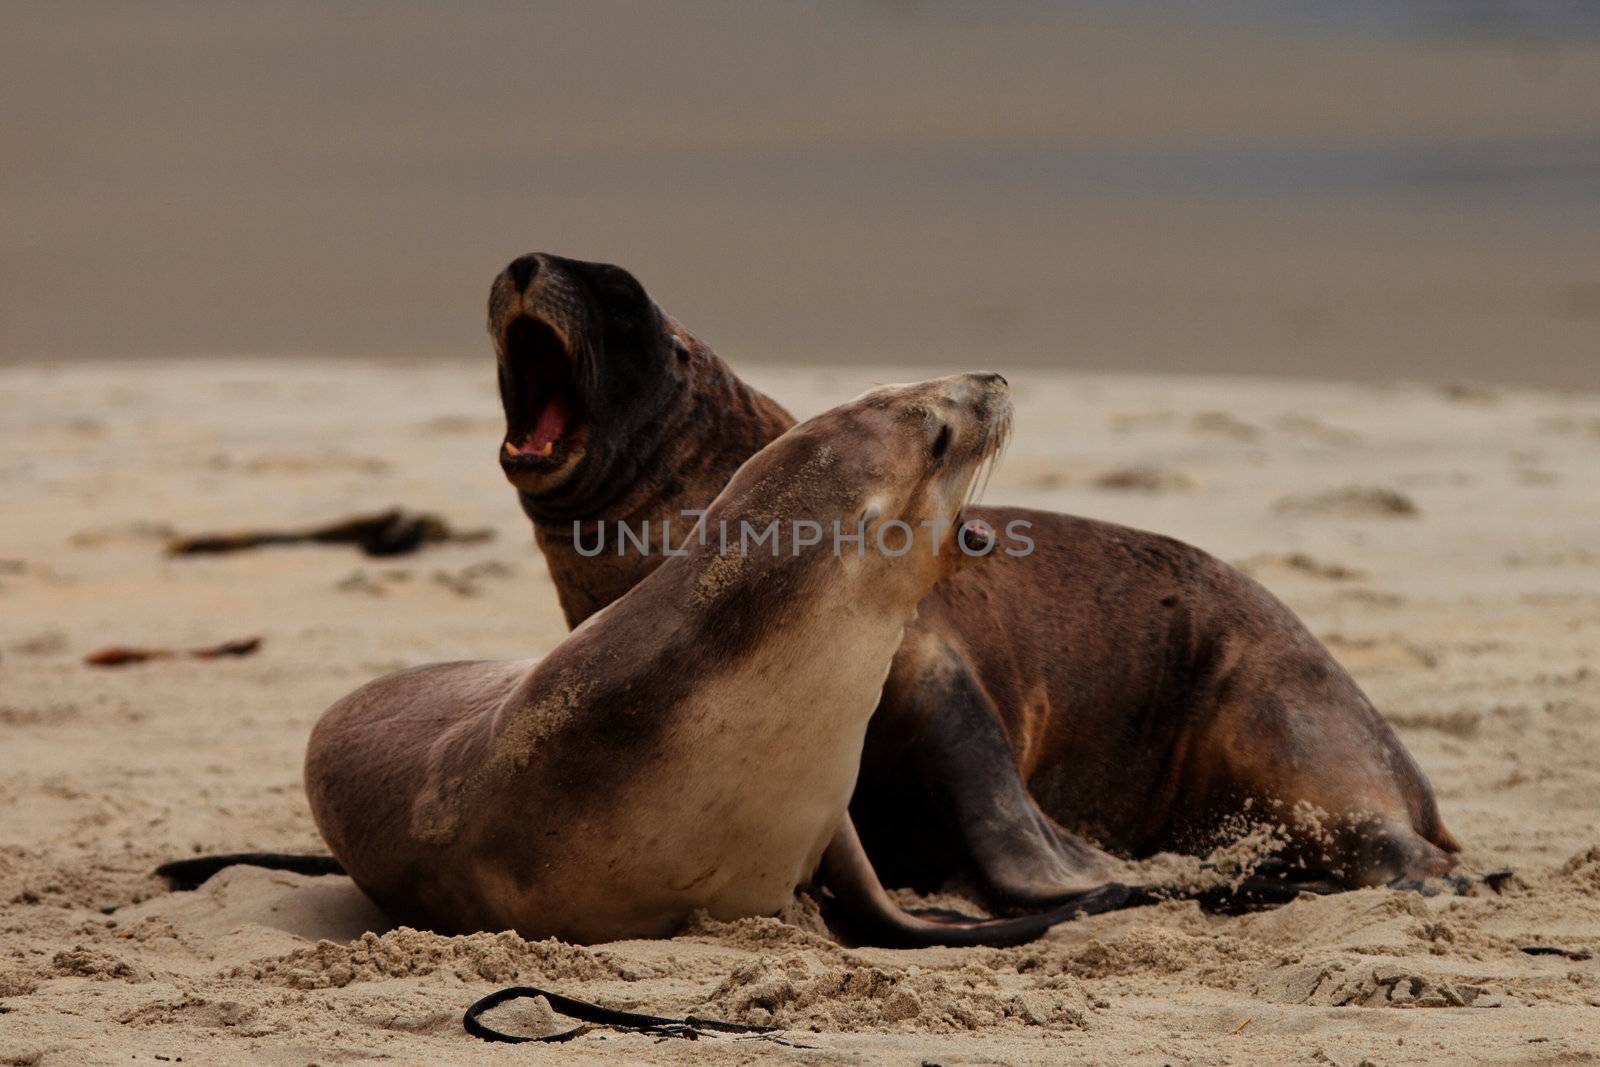 Male and female Hookers sealions Phocarctos hookeri or whakahao engaged in rough playful act of courtship behaviour on sandy beach